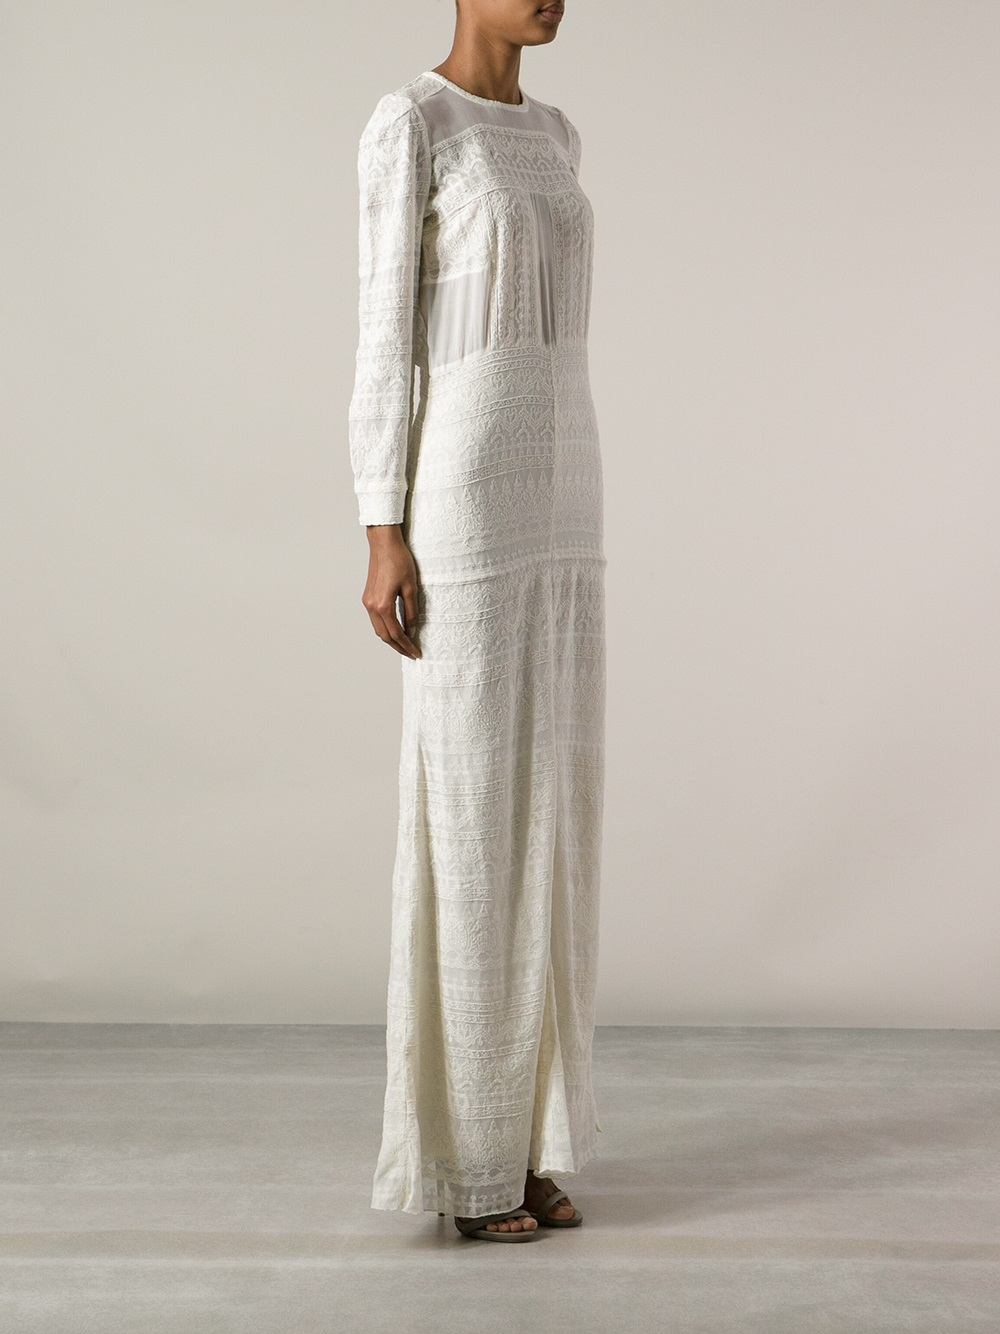 Isabel Marant Lace Dress in White | Lyst